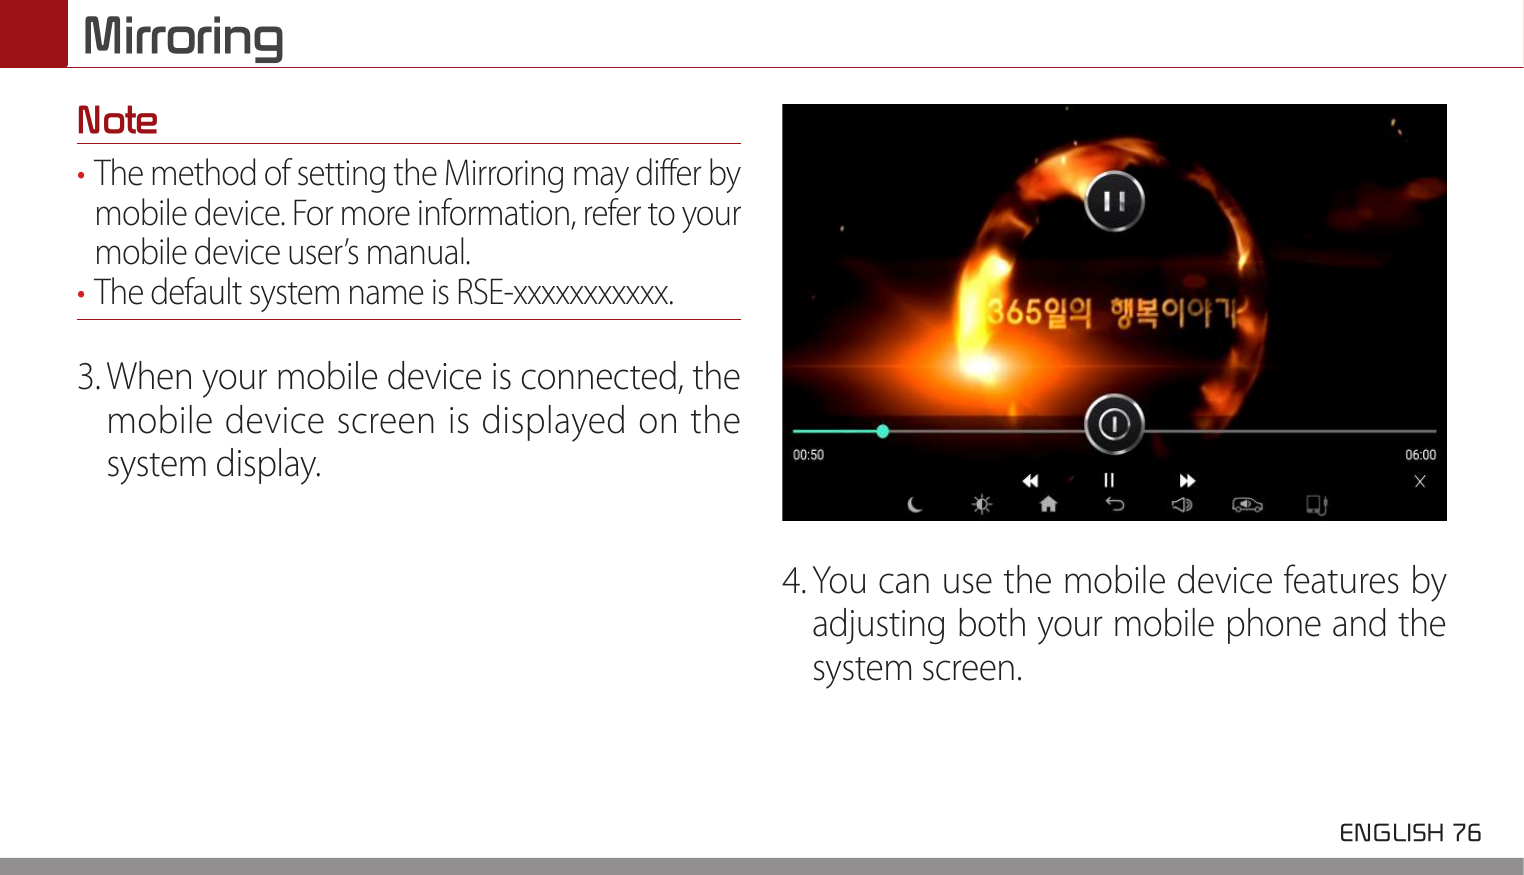 Mirroring ENGLISH 76 Note• The method of setting the Mirroring may differ by  mobile device. For more information, refer to your mobile device user’s manual.• The default system name is RSE-xxxxxxxxxxx.3. When your mobile device is connected, the mobile device screen is displayed on the system display.4. You can use the mobile device features by adjusting both your mobile phone and the system screen.